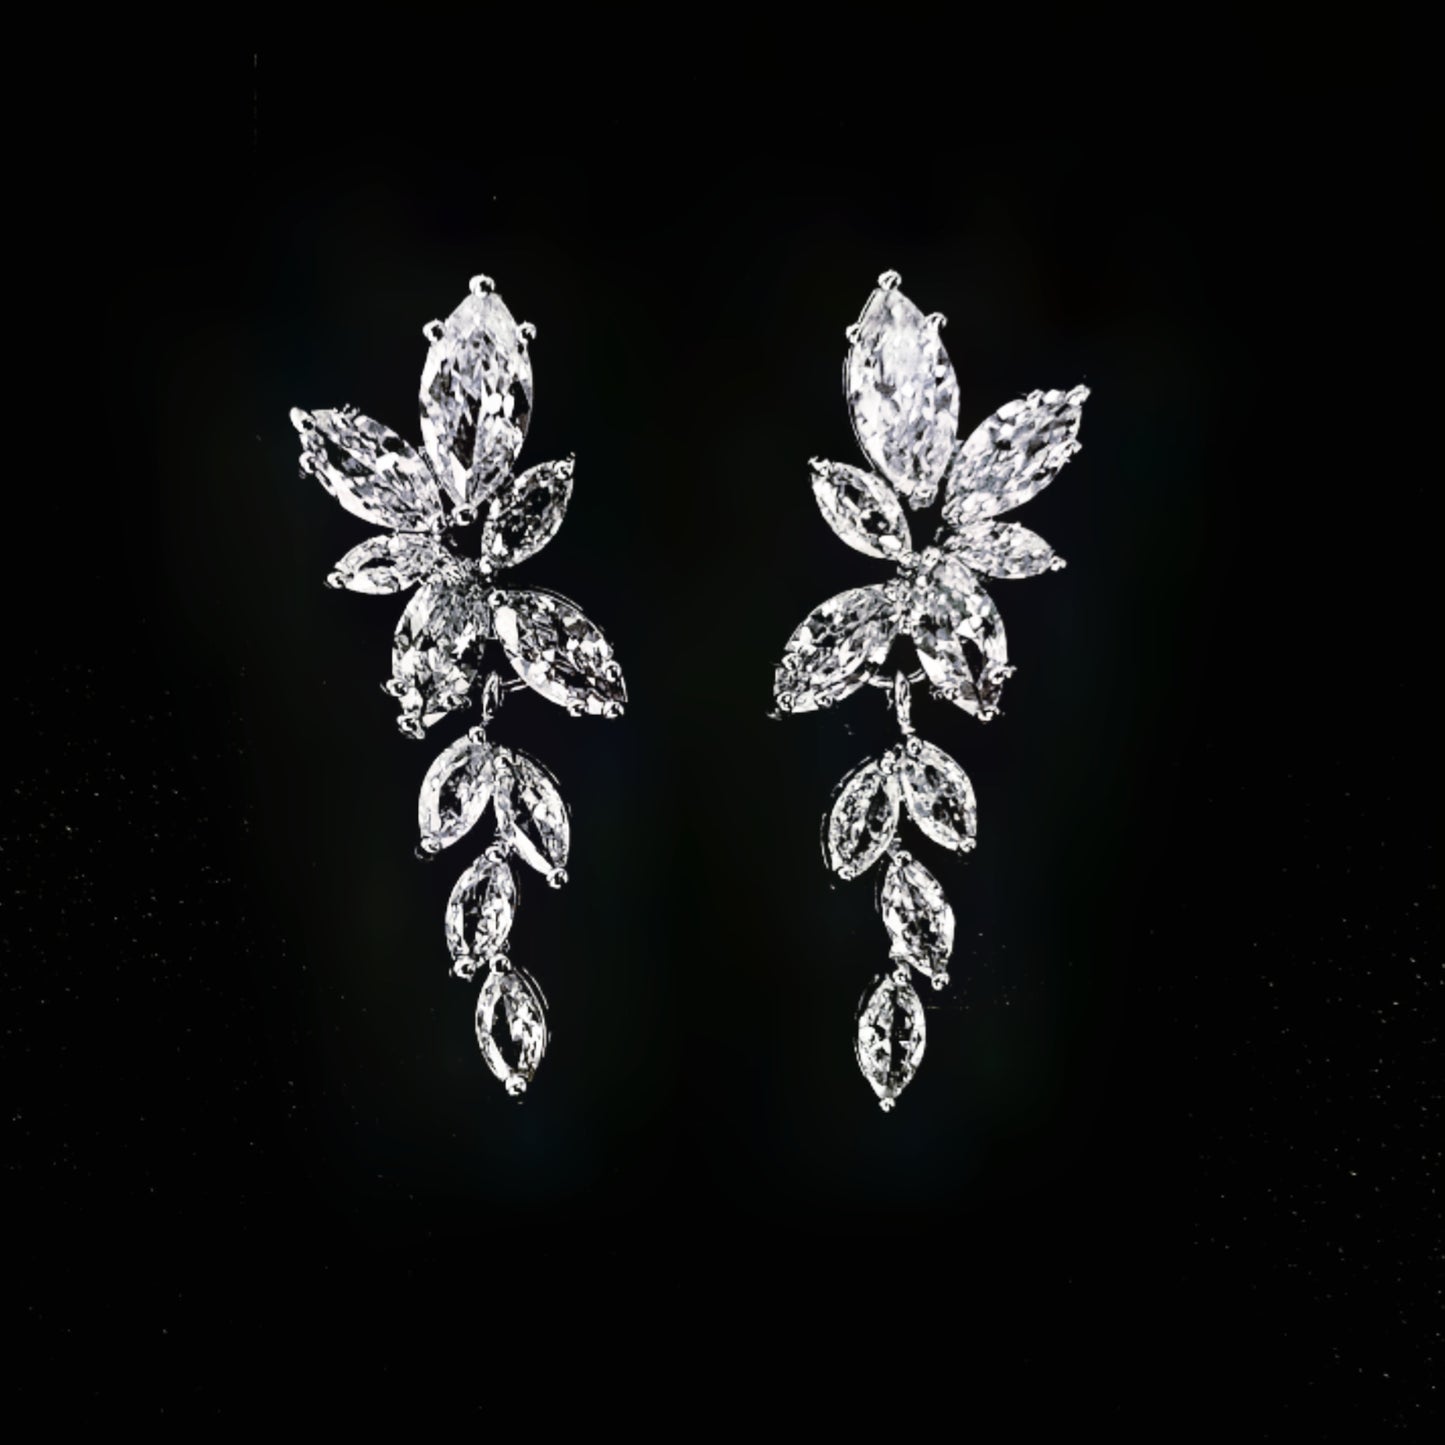 A close-up of a pair of silver earrings with white diamonds. The earrings are simple in design and the diamonds are sparkling. The earrings are very elegant and would be perfect for a special occasion.